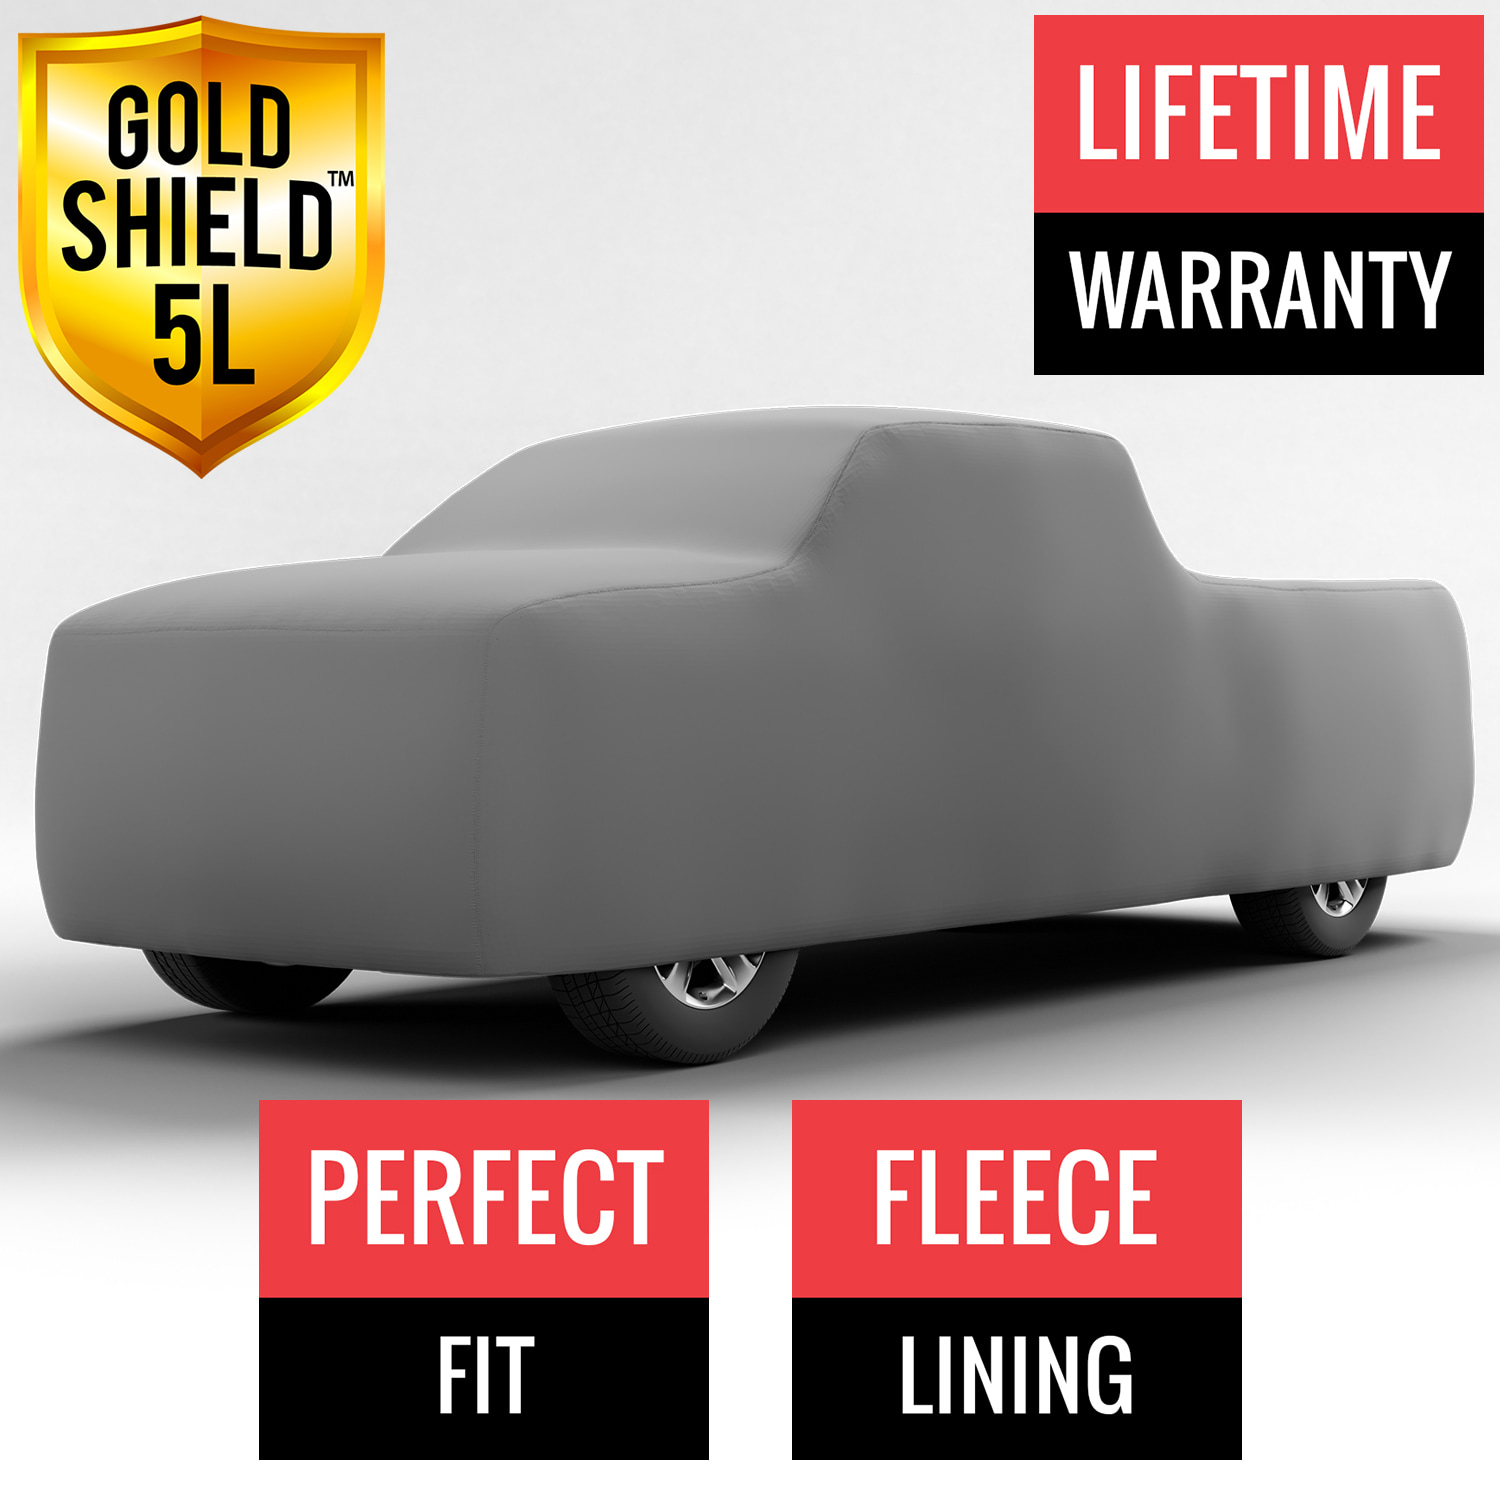 Gold Shield 5L - Car Cover for GMC C1500 1992 Regular Cab Pickup 6.5 Feet Bed